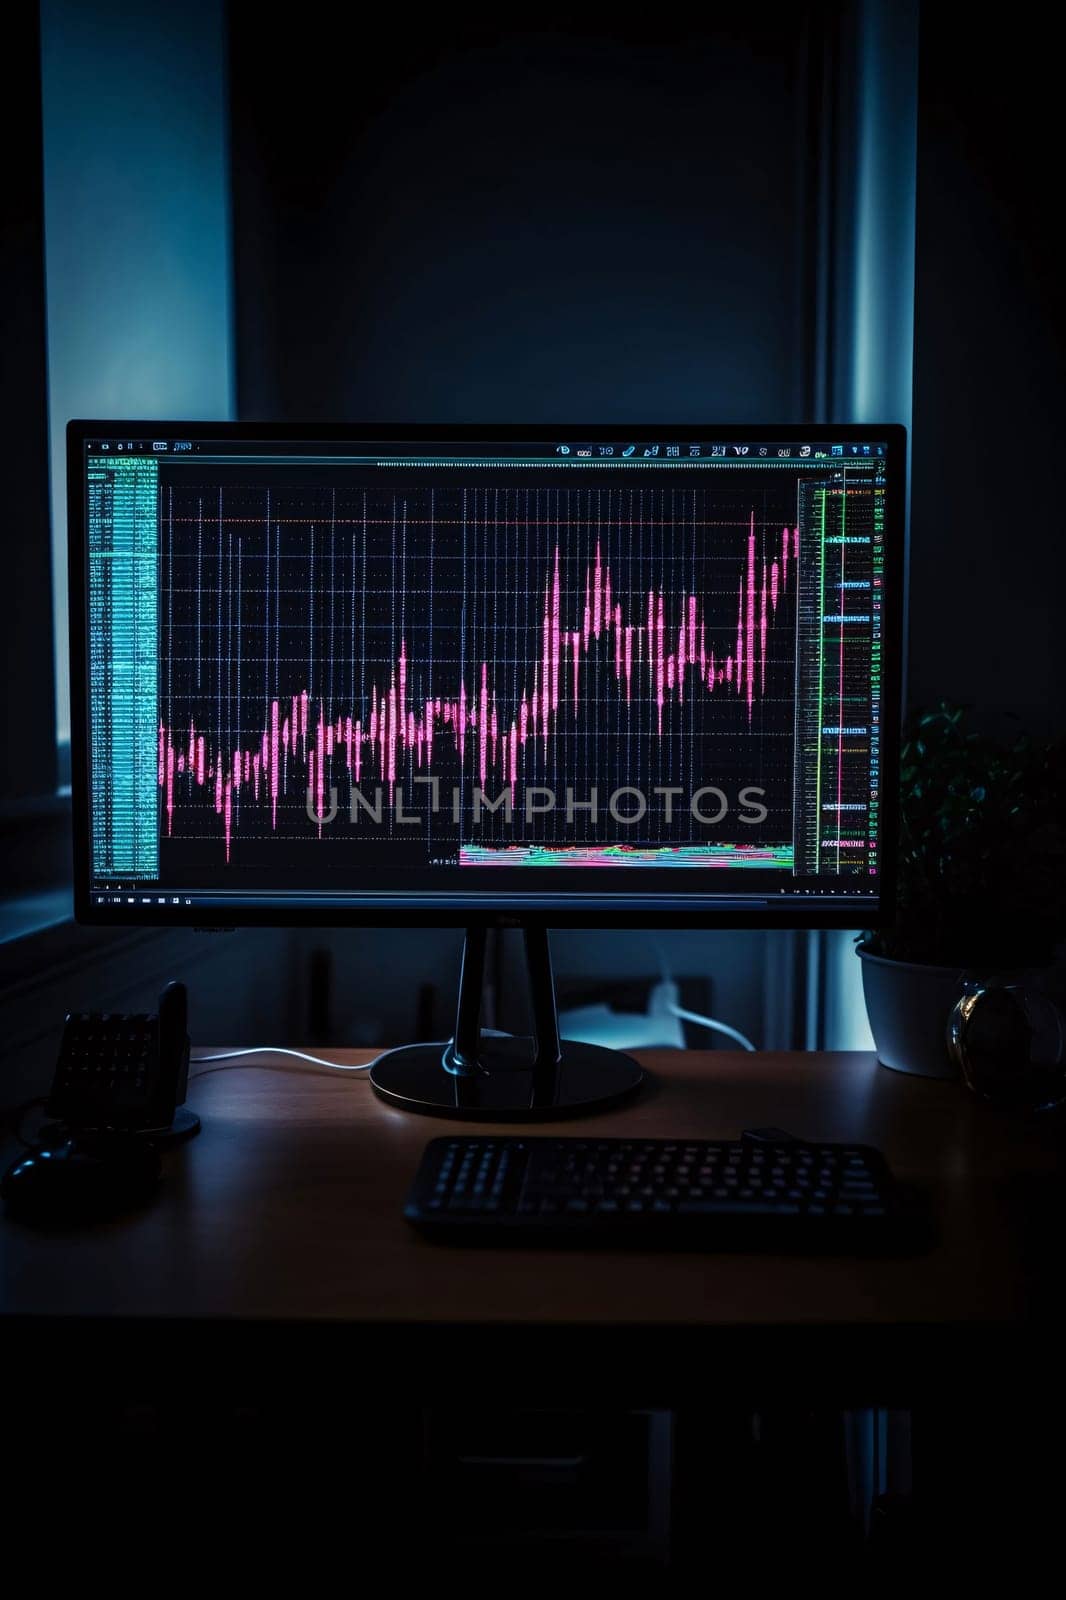 Stock Market: Monitor with stock market chart on computer screen in dark room. Business and finance concept.